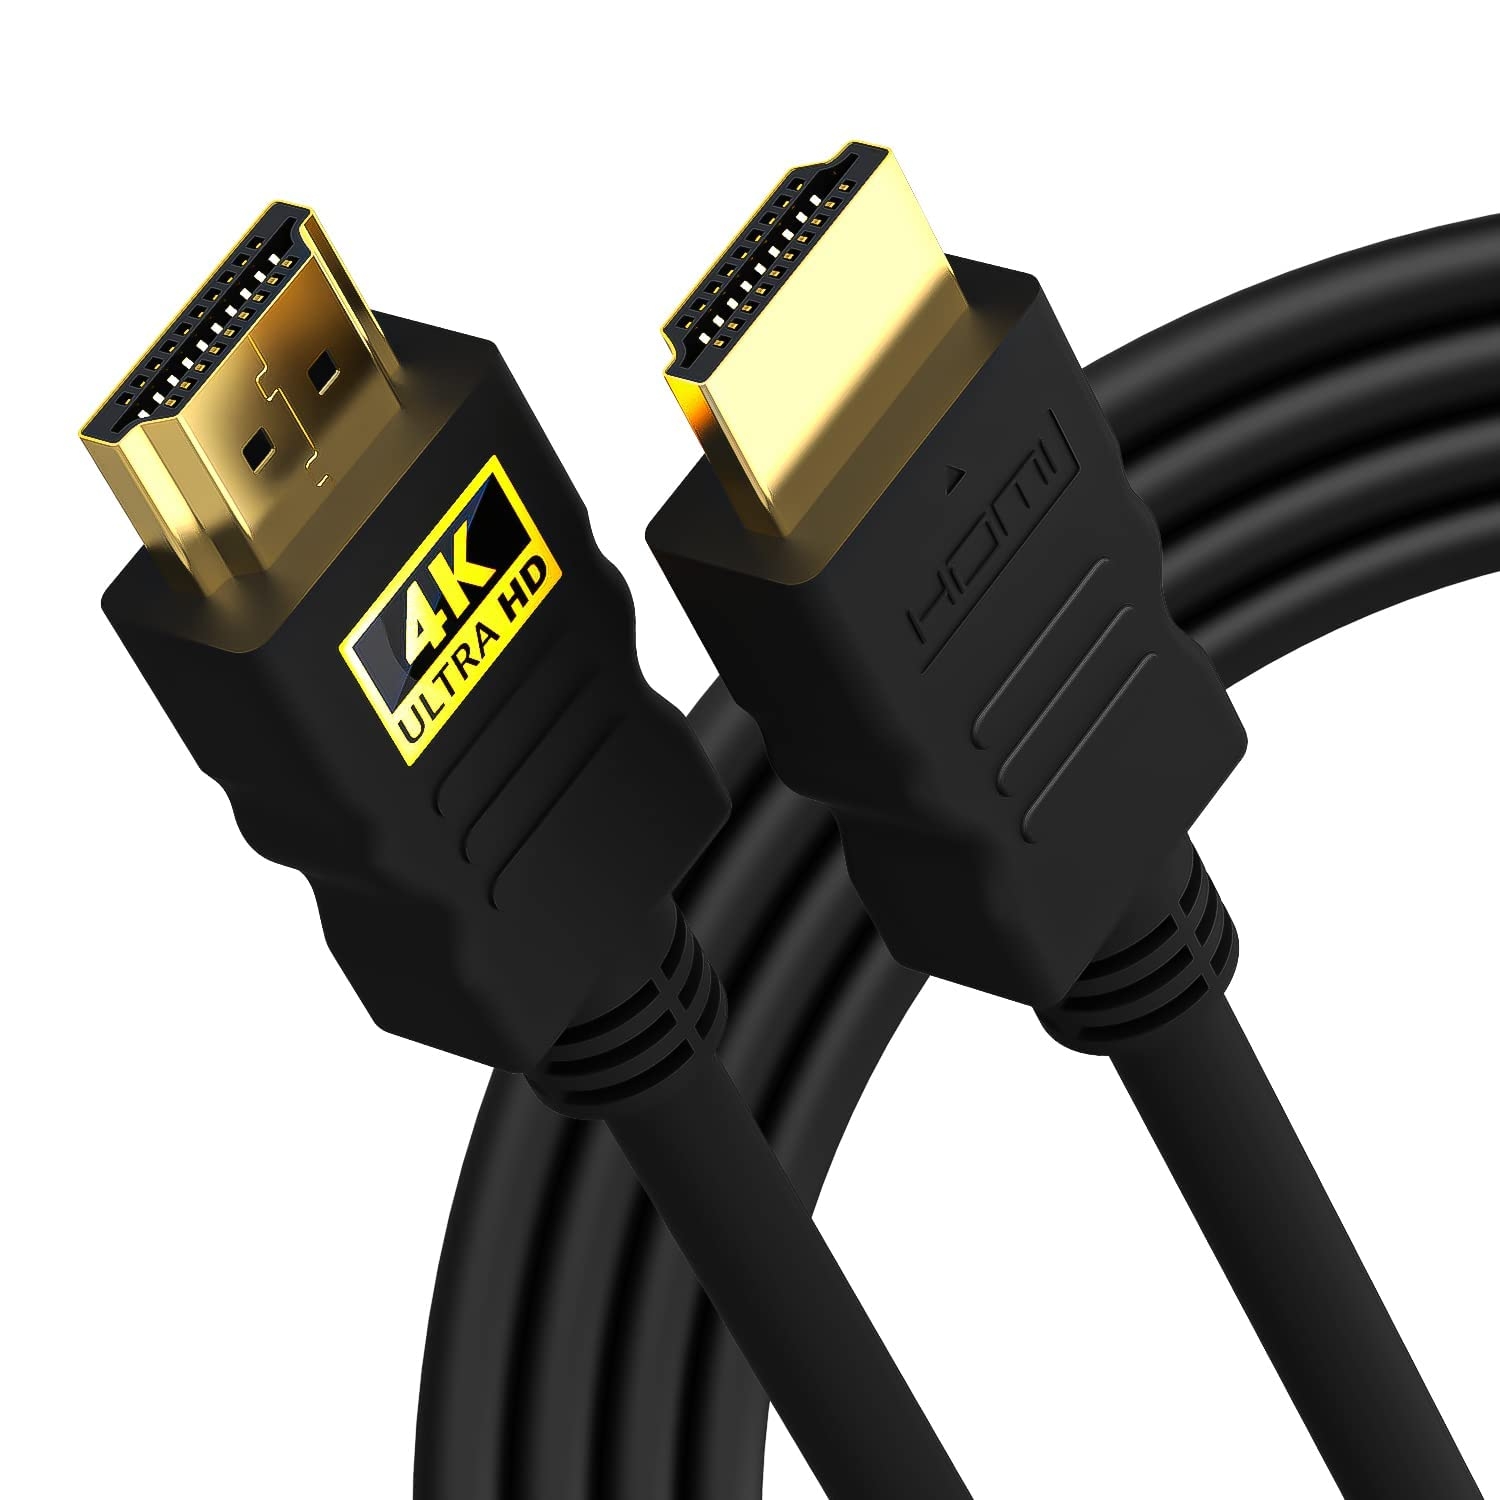 Conrbe HDMI Cable 3 Meter with Ethernet 3D 4K for Laptop Computer Gaming Console TV Set Top Box - 10 Feet